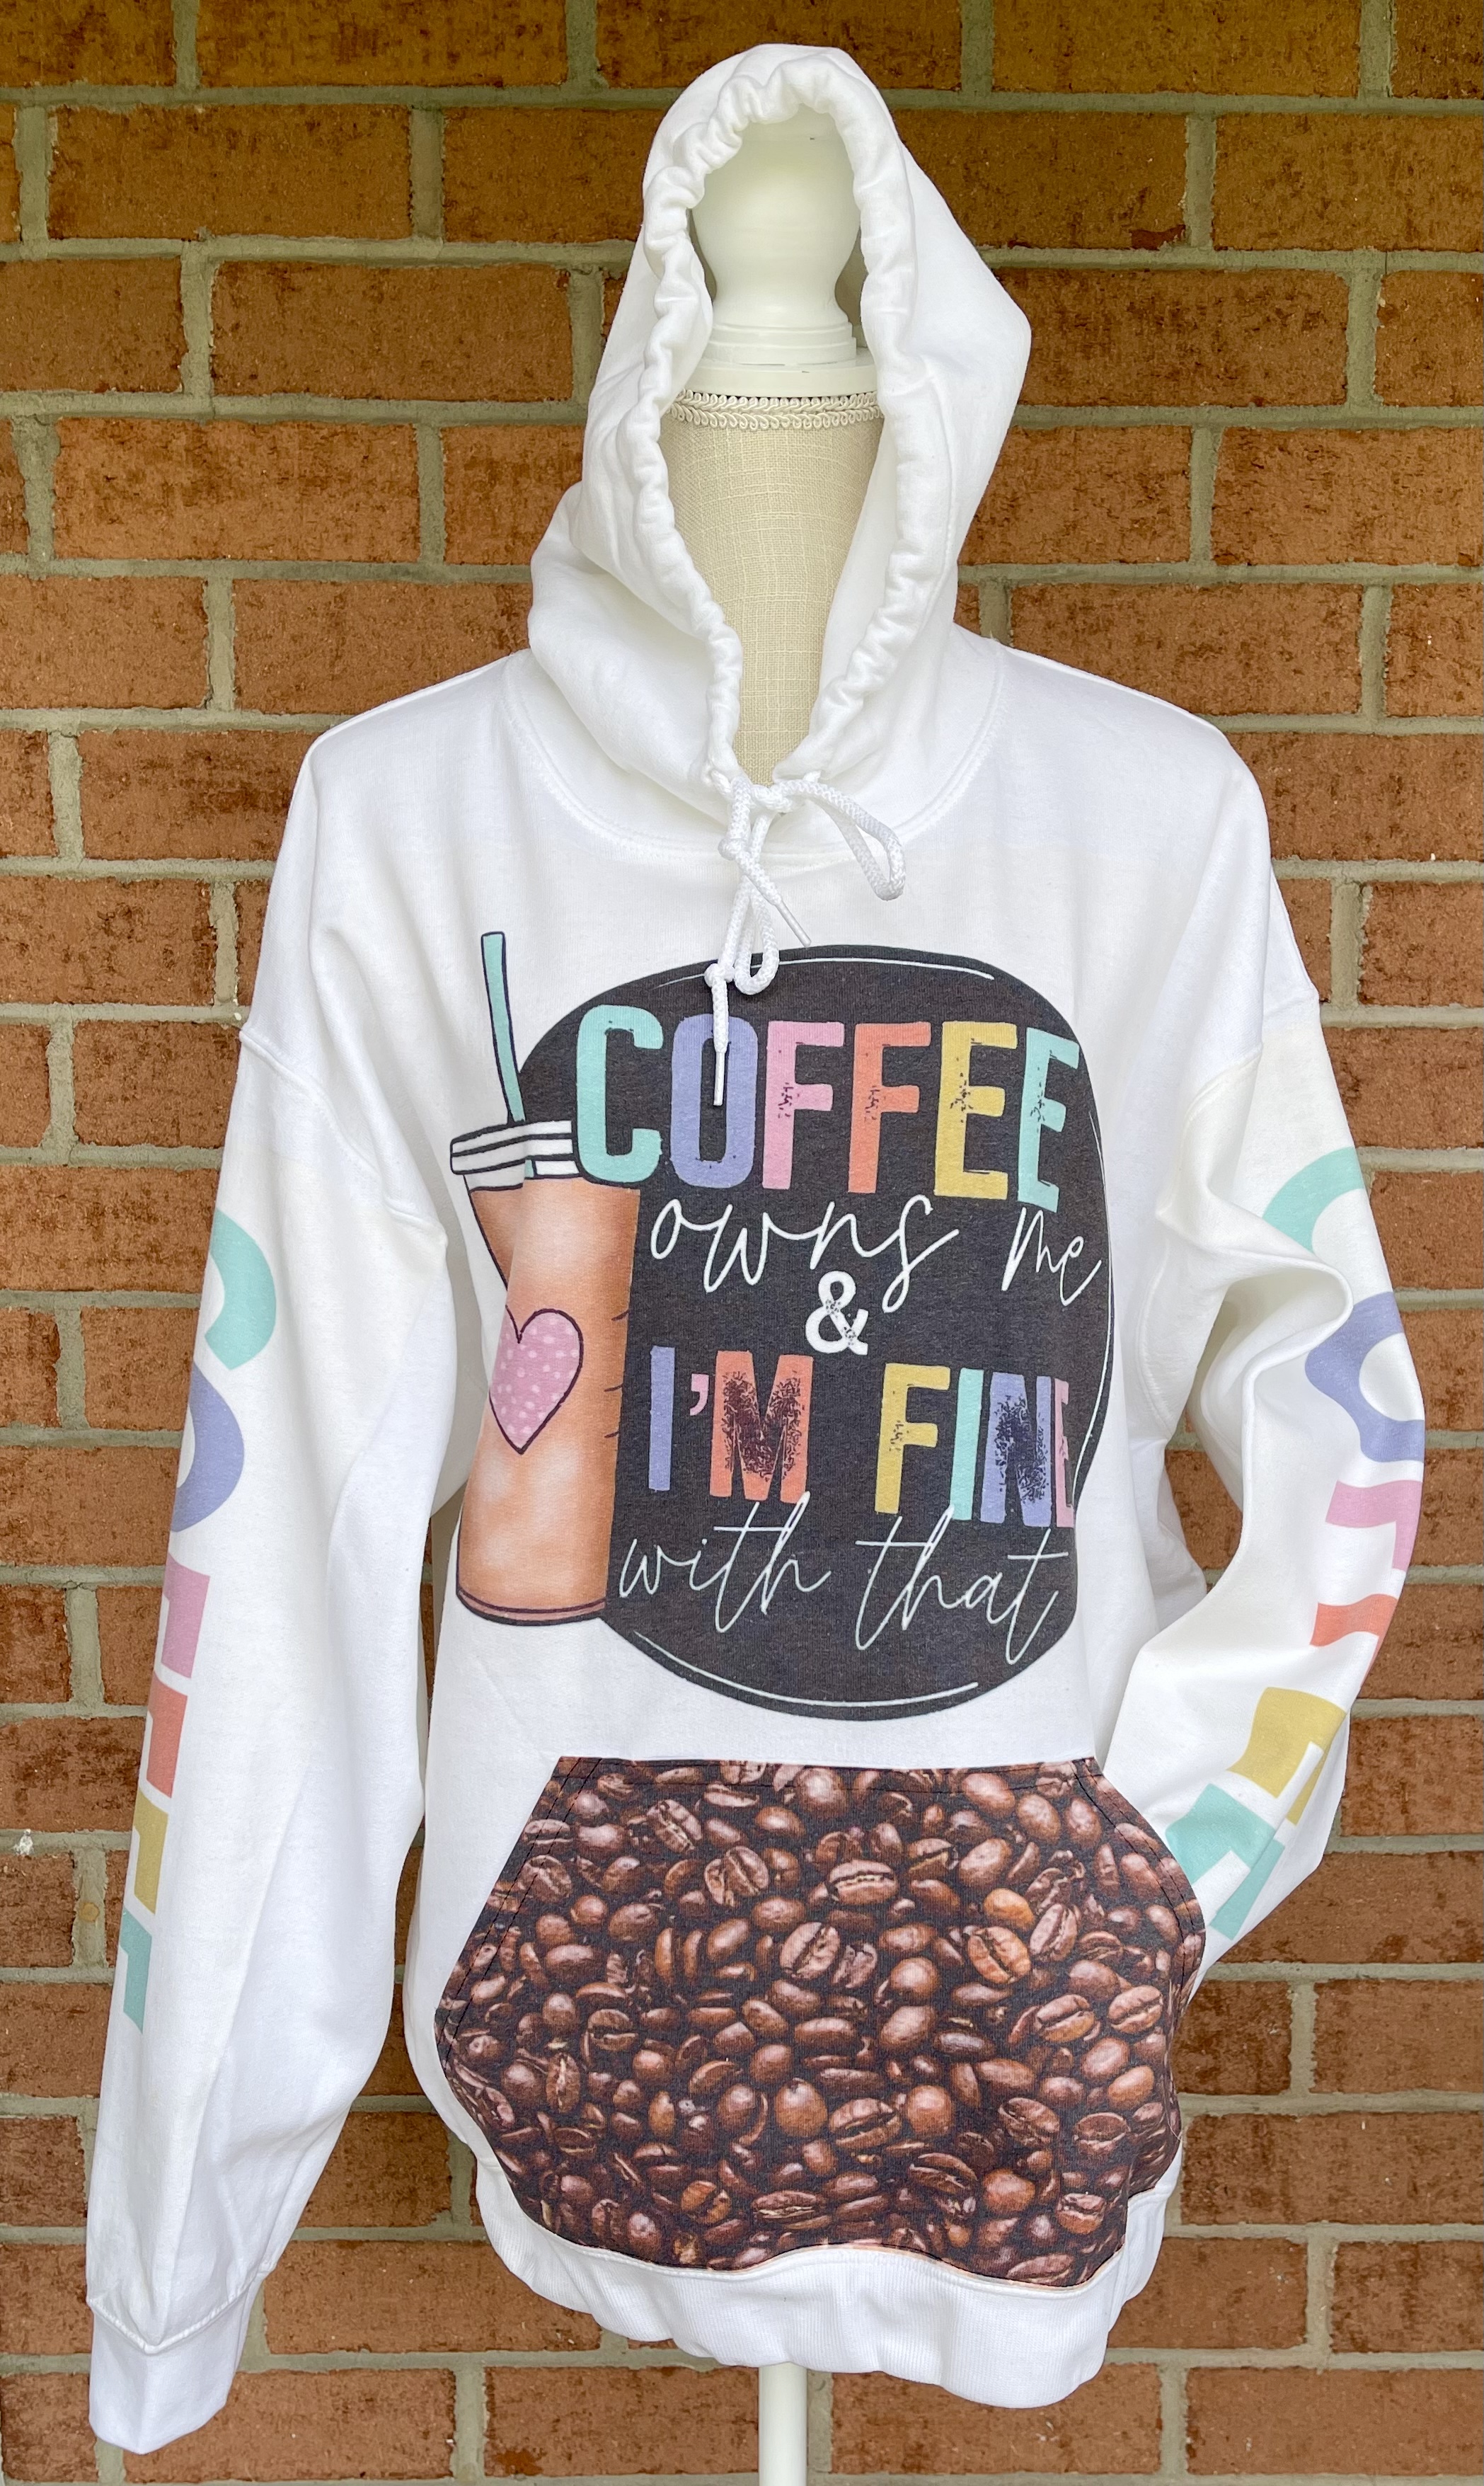 Coffee owns me made with sublimation printing